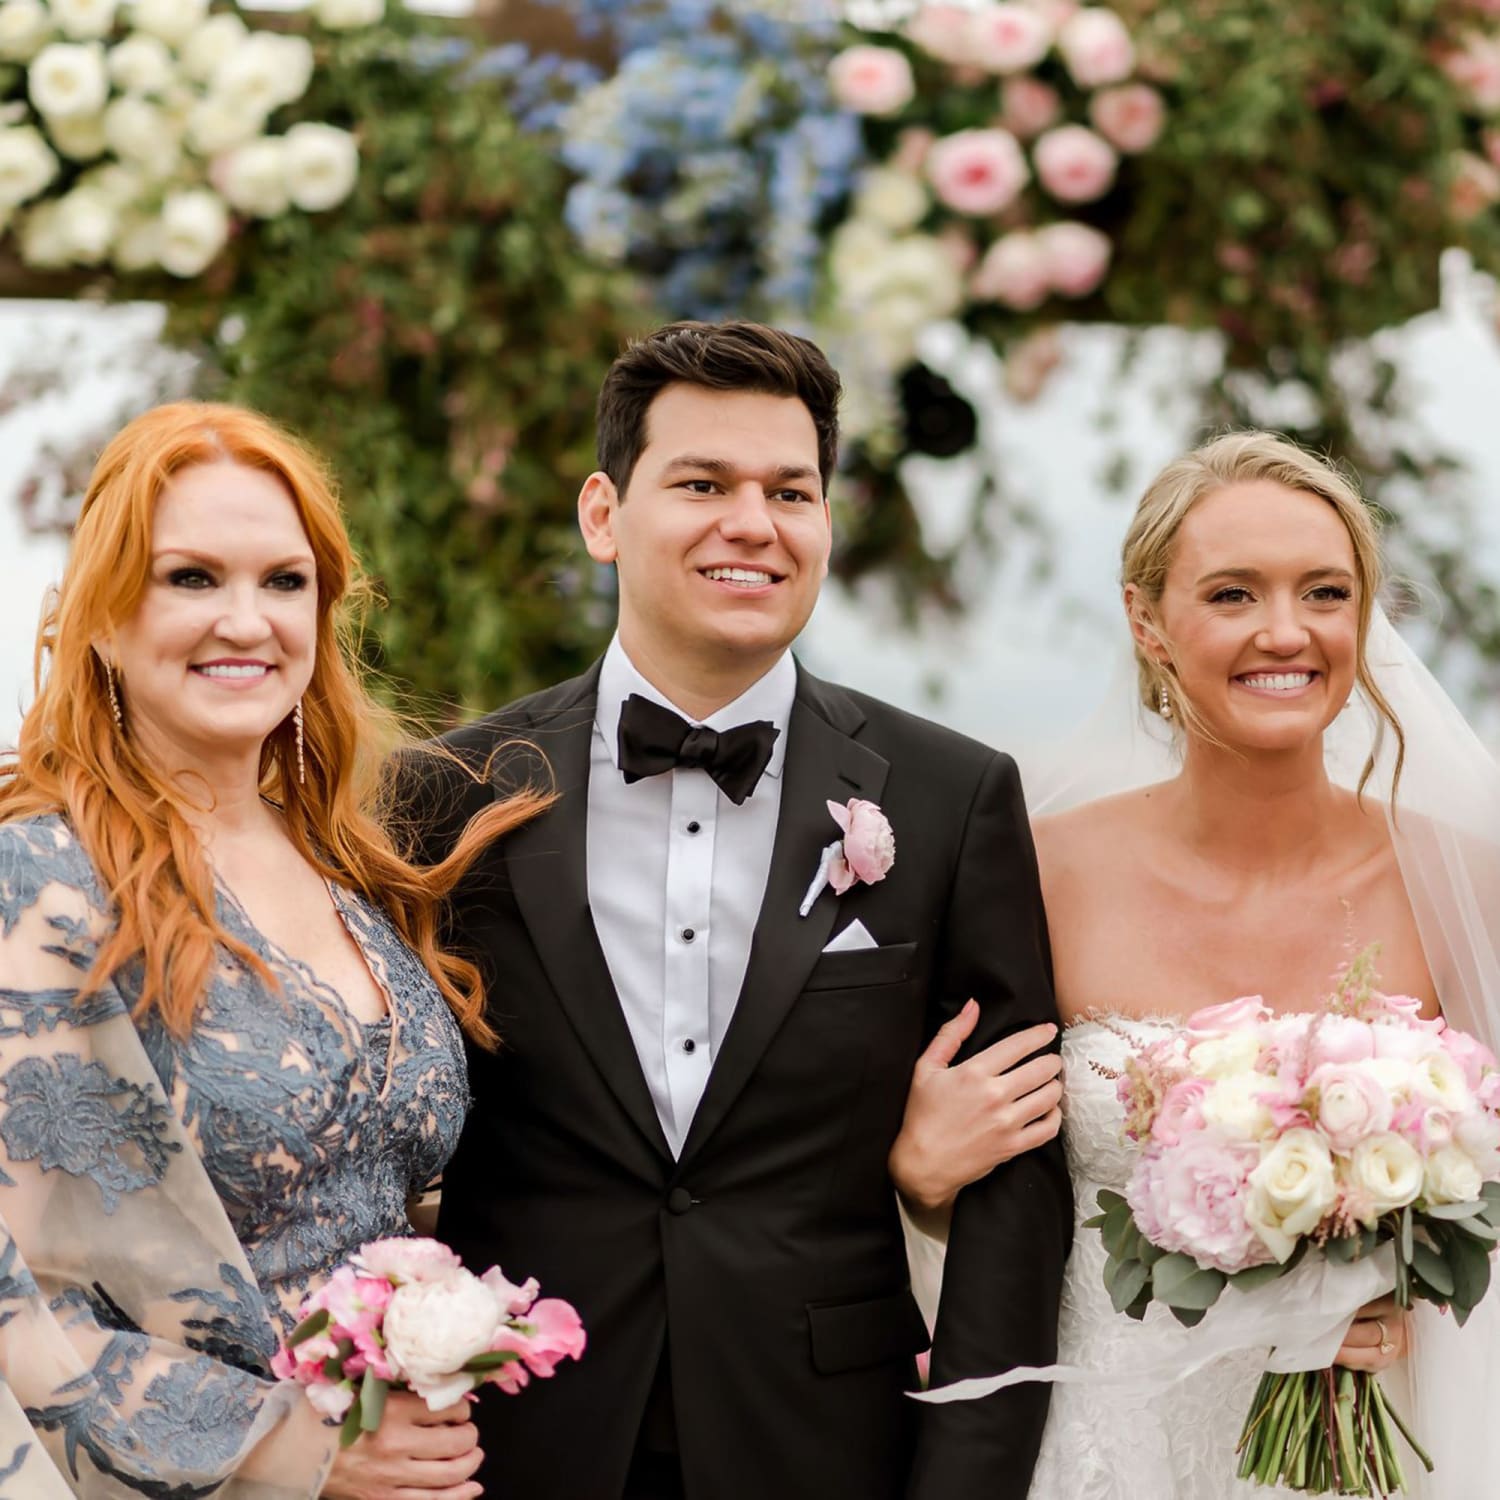 Ree Drummond said she was 'dead for 2 weeks' after daughter's wedding